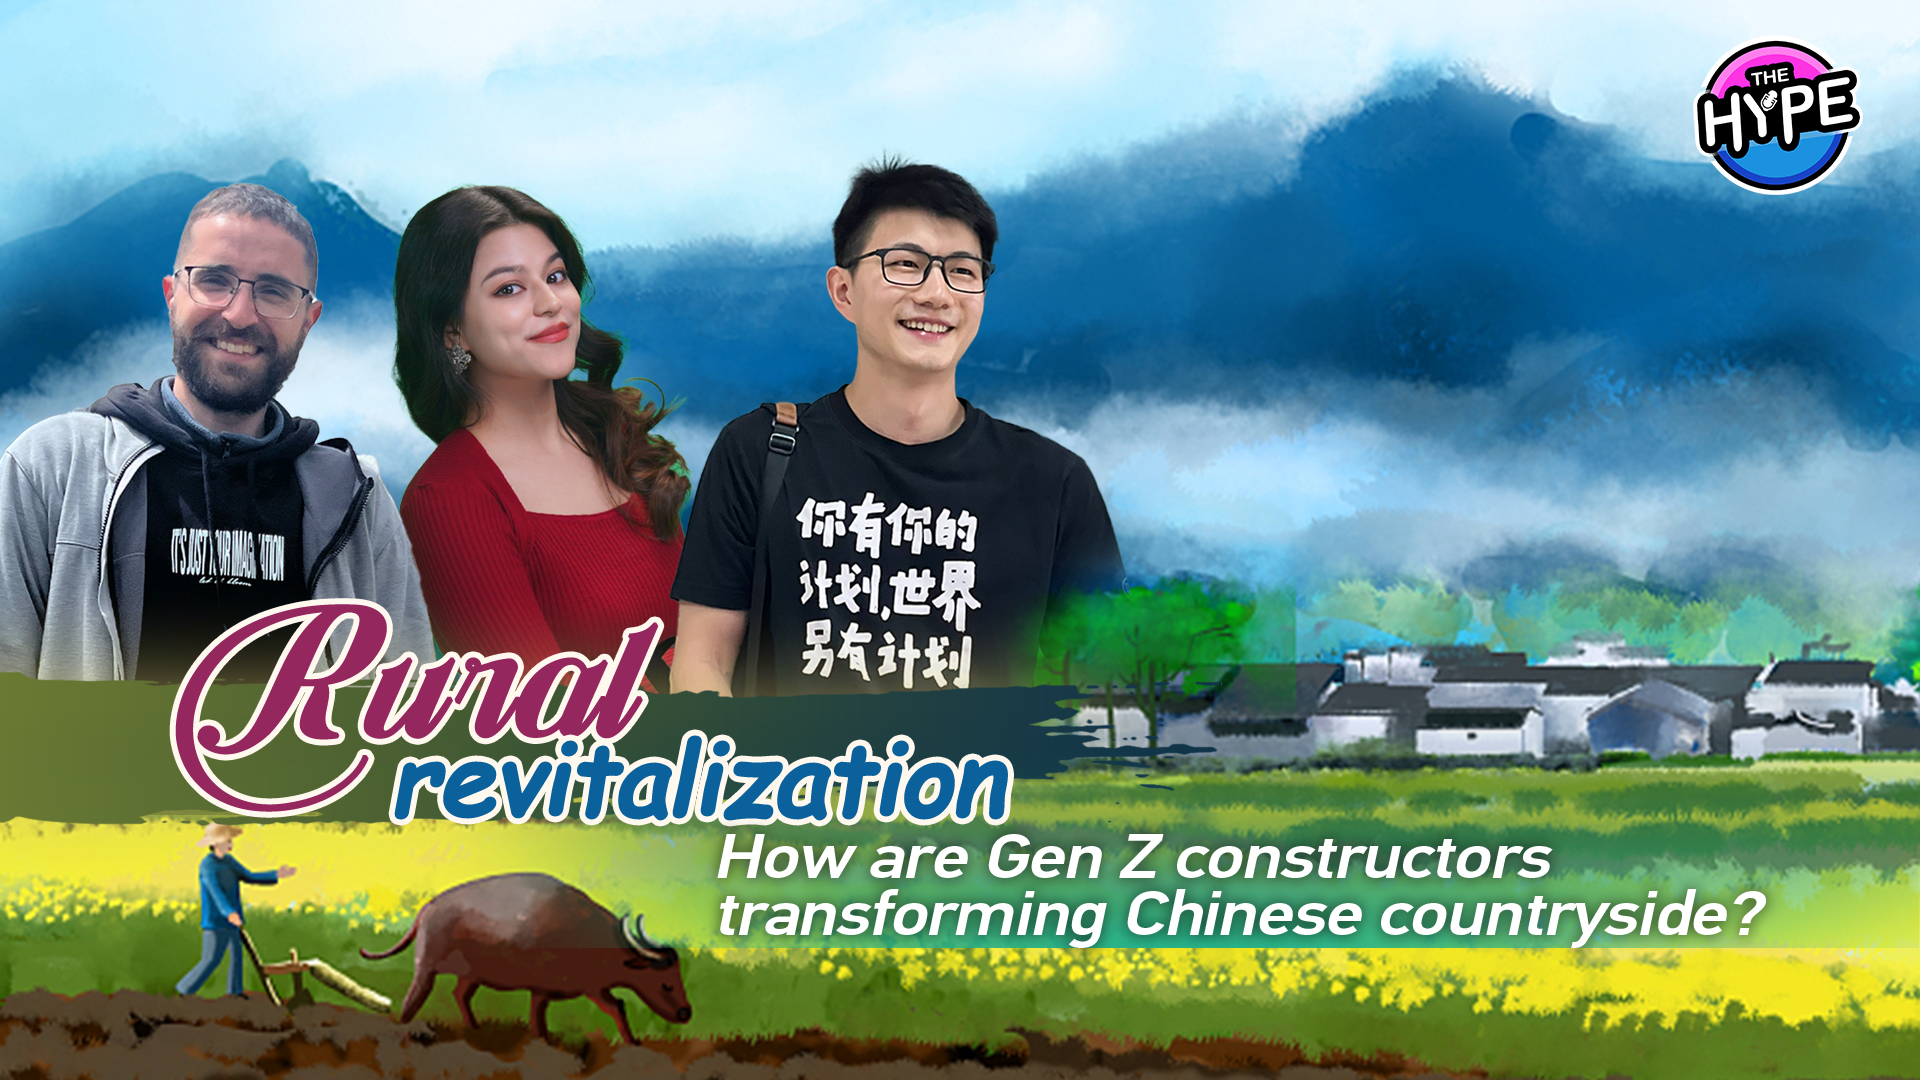 Live: THE HYPE – How are Gen Z constructors transforming Chinese countryside?